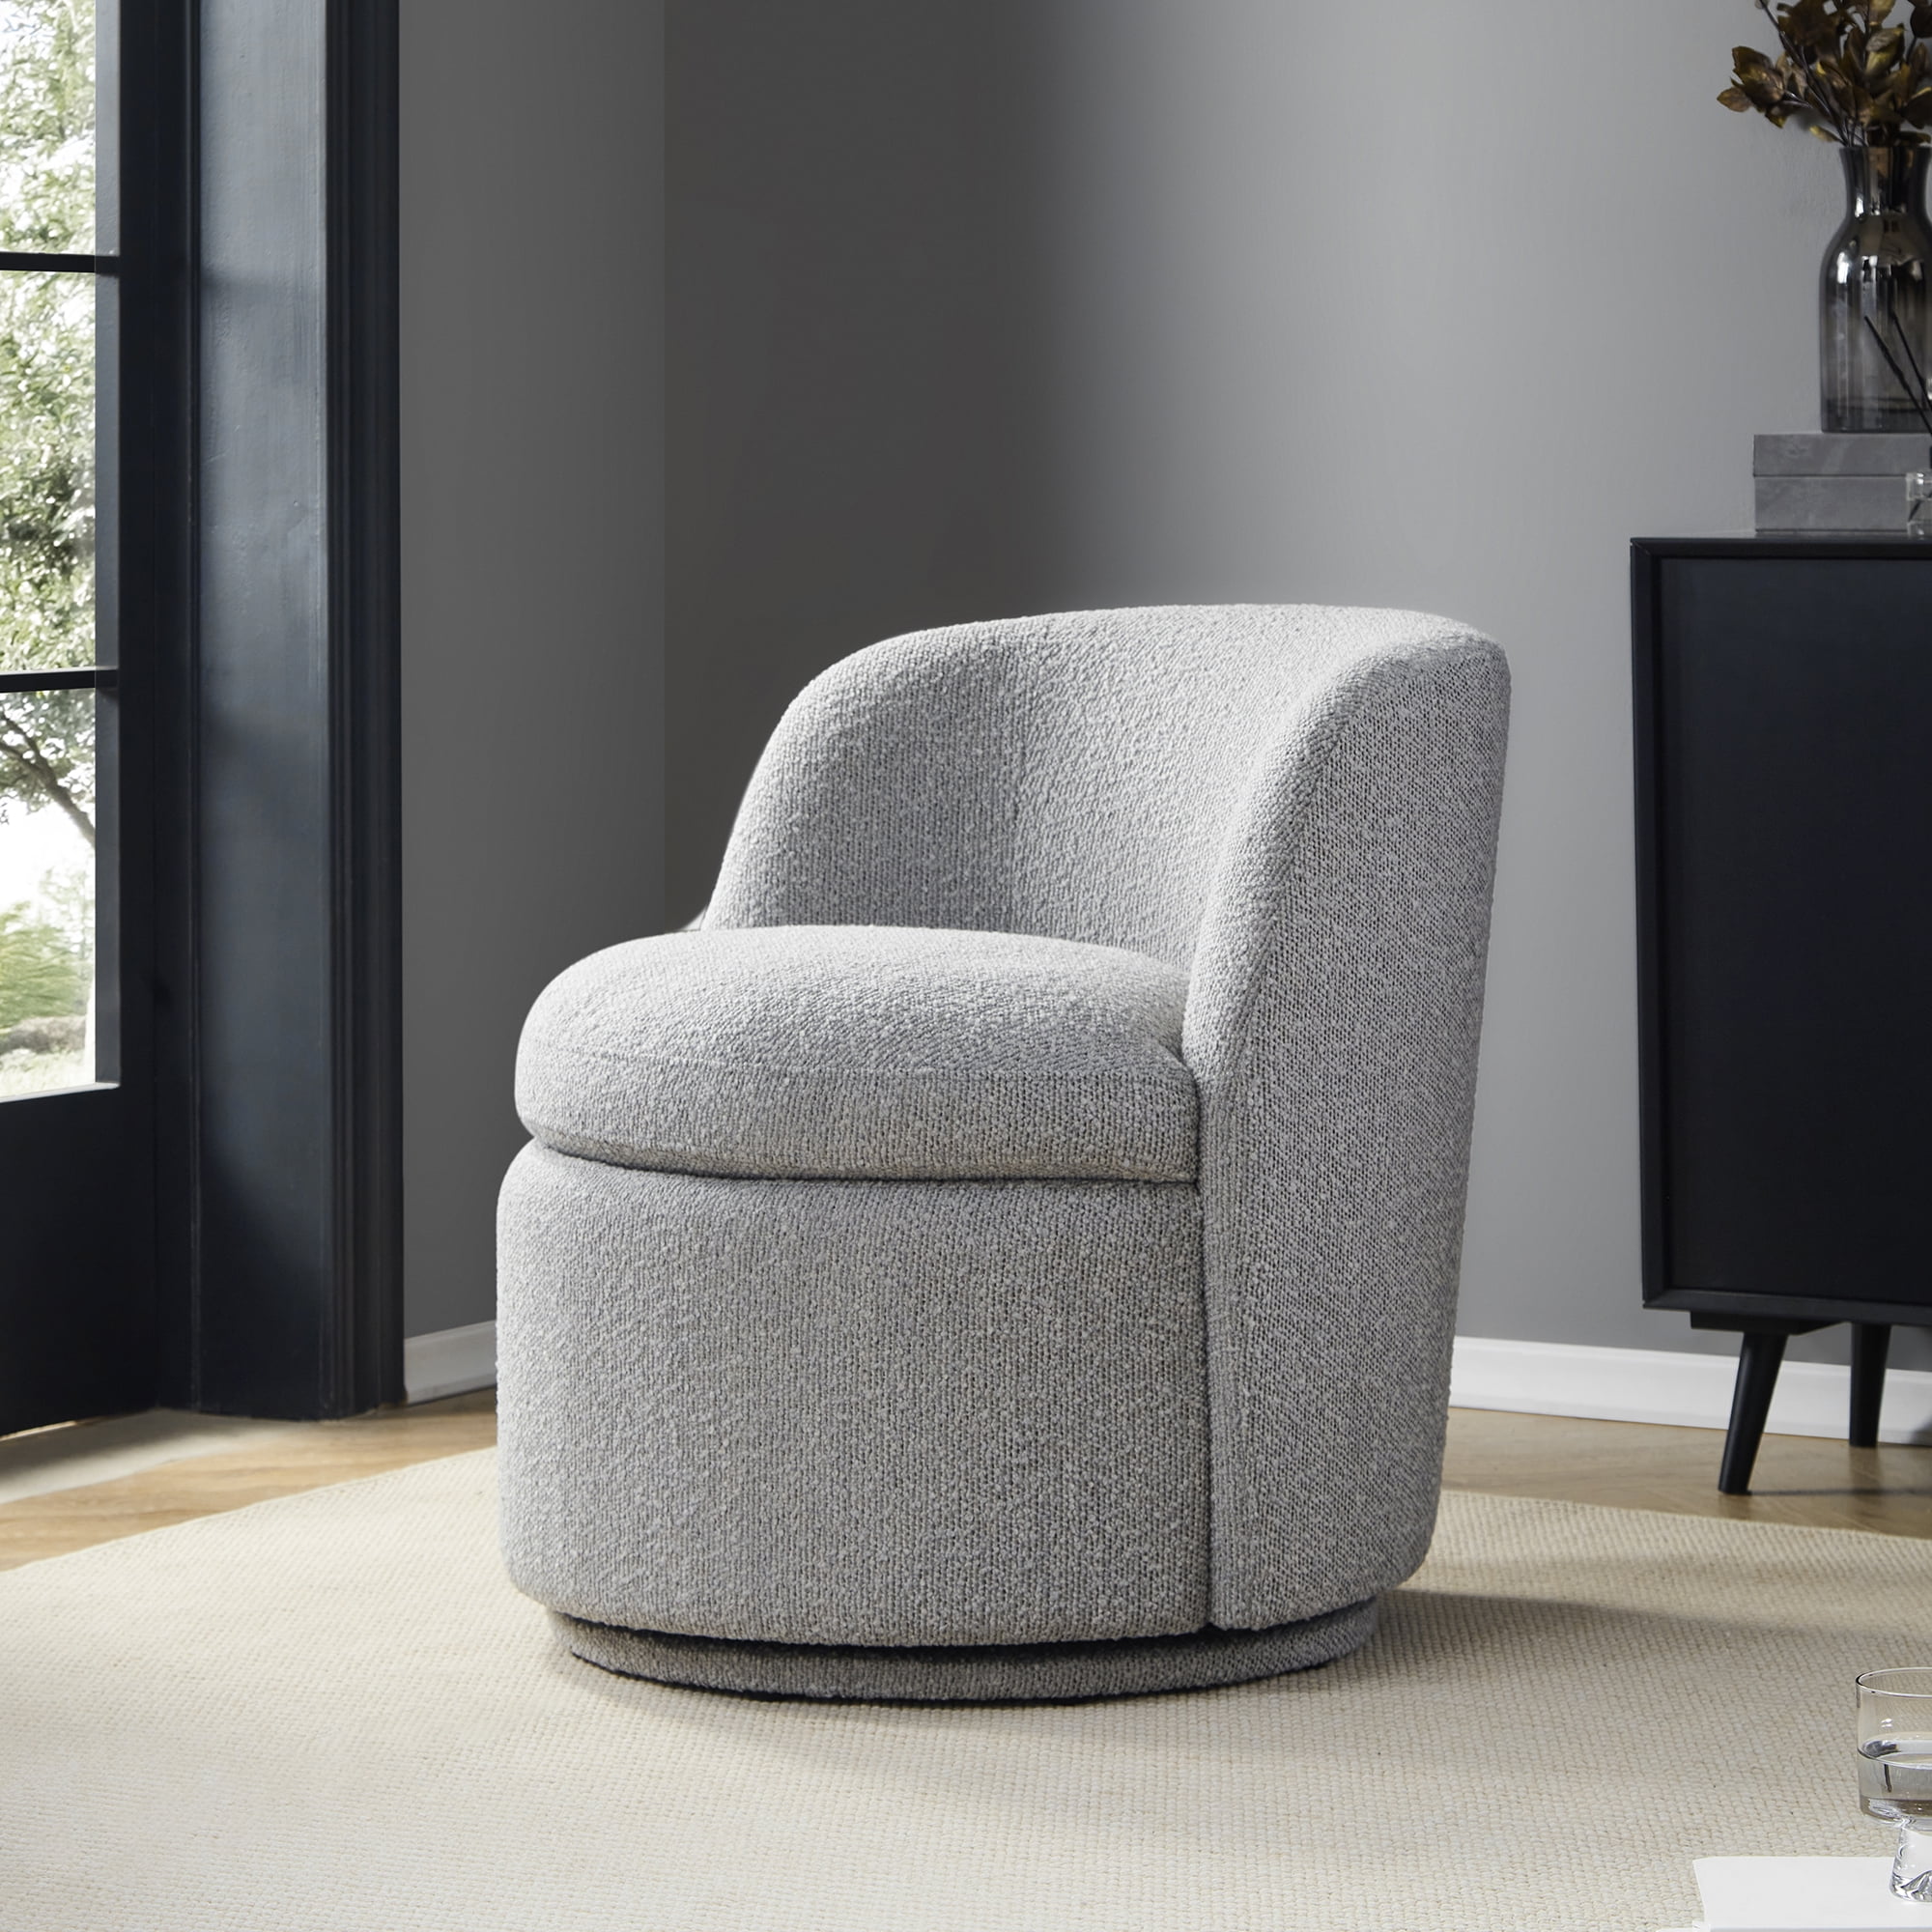 CHITA Swivel Accent Chair Armchair, Round Barrel Chairs in Fabric for ...